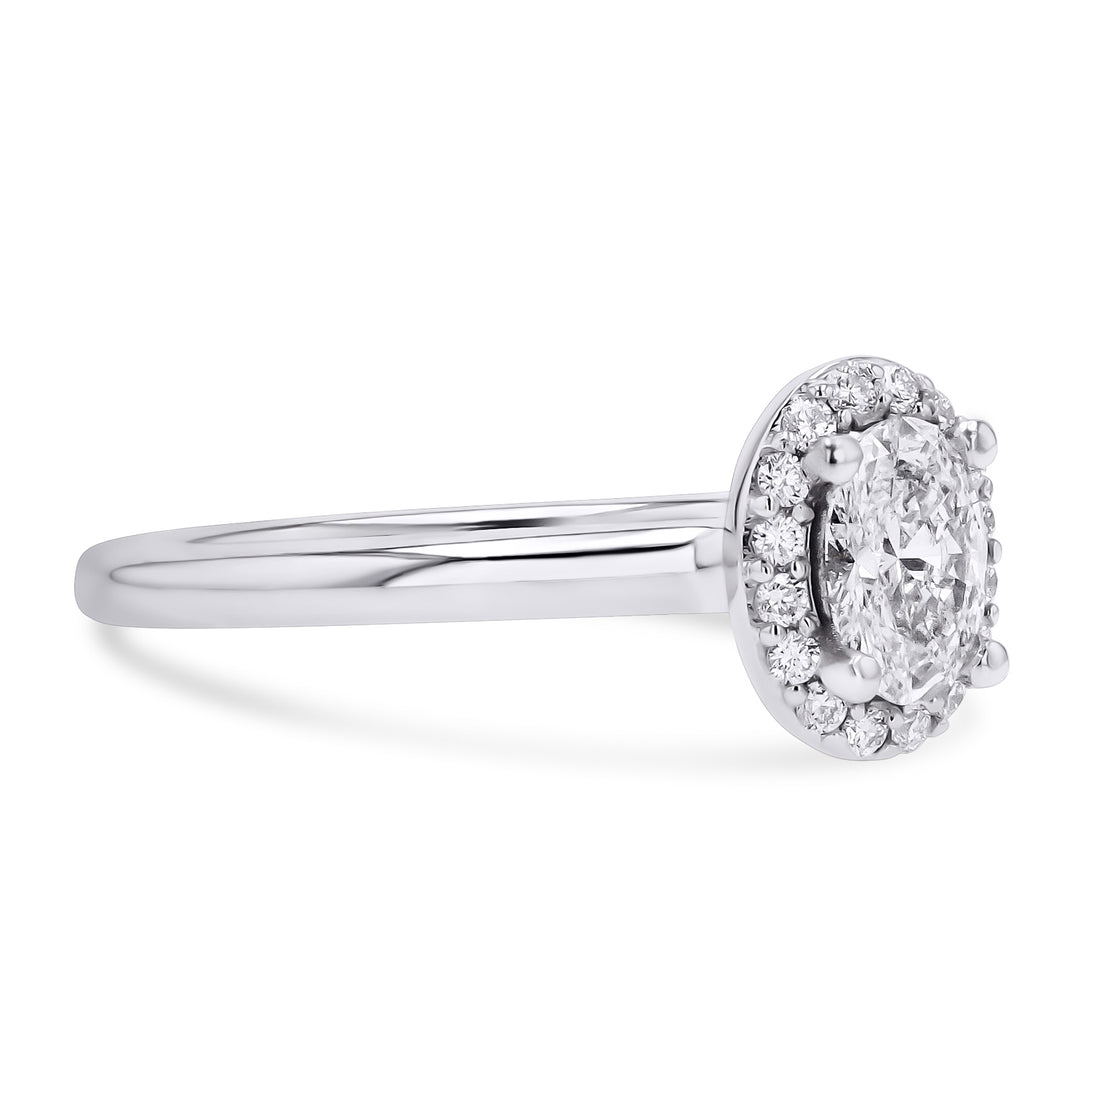 Floating Halo Oval Engagement Ring - Skeie's Jewelers